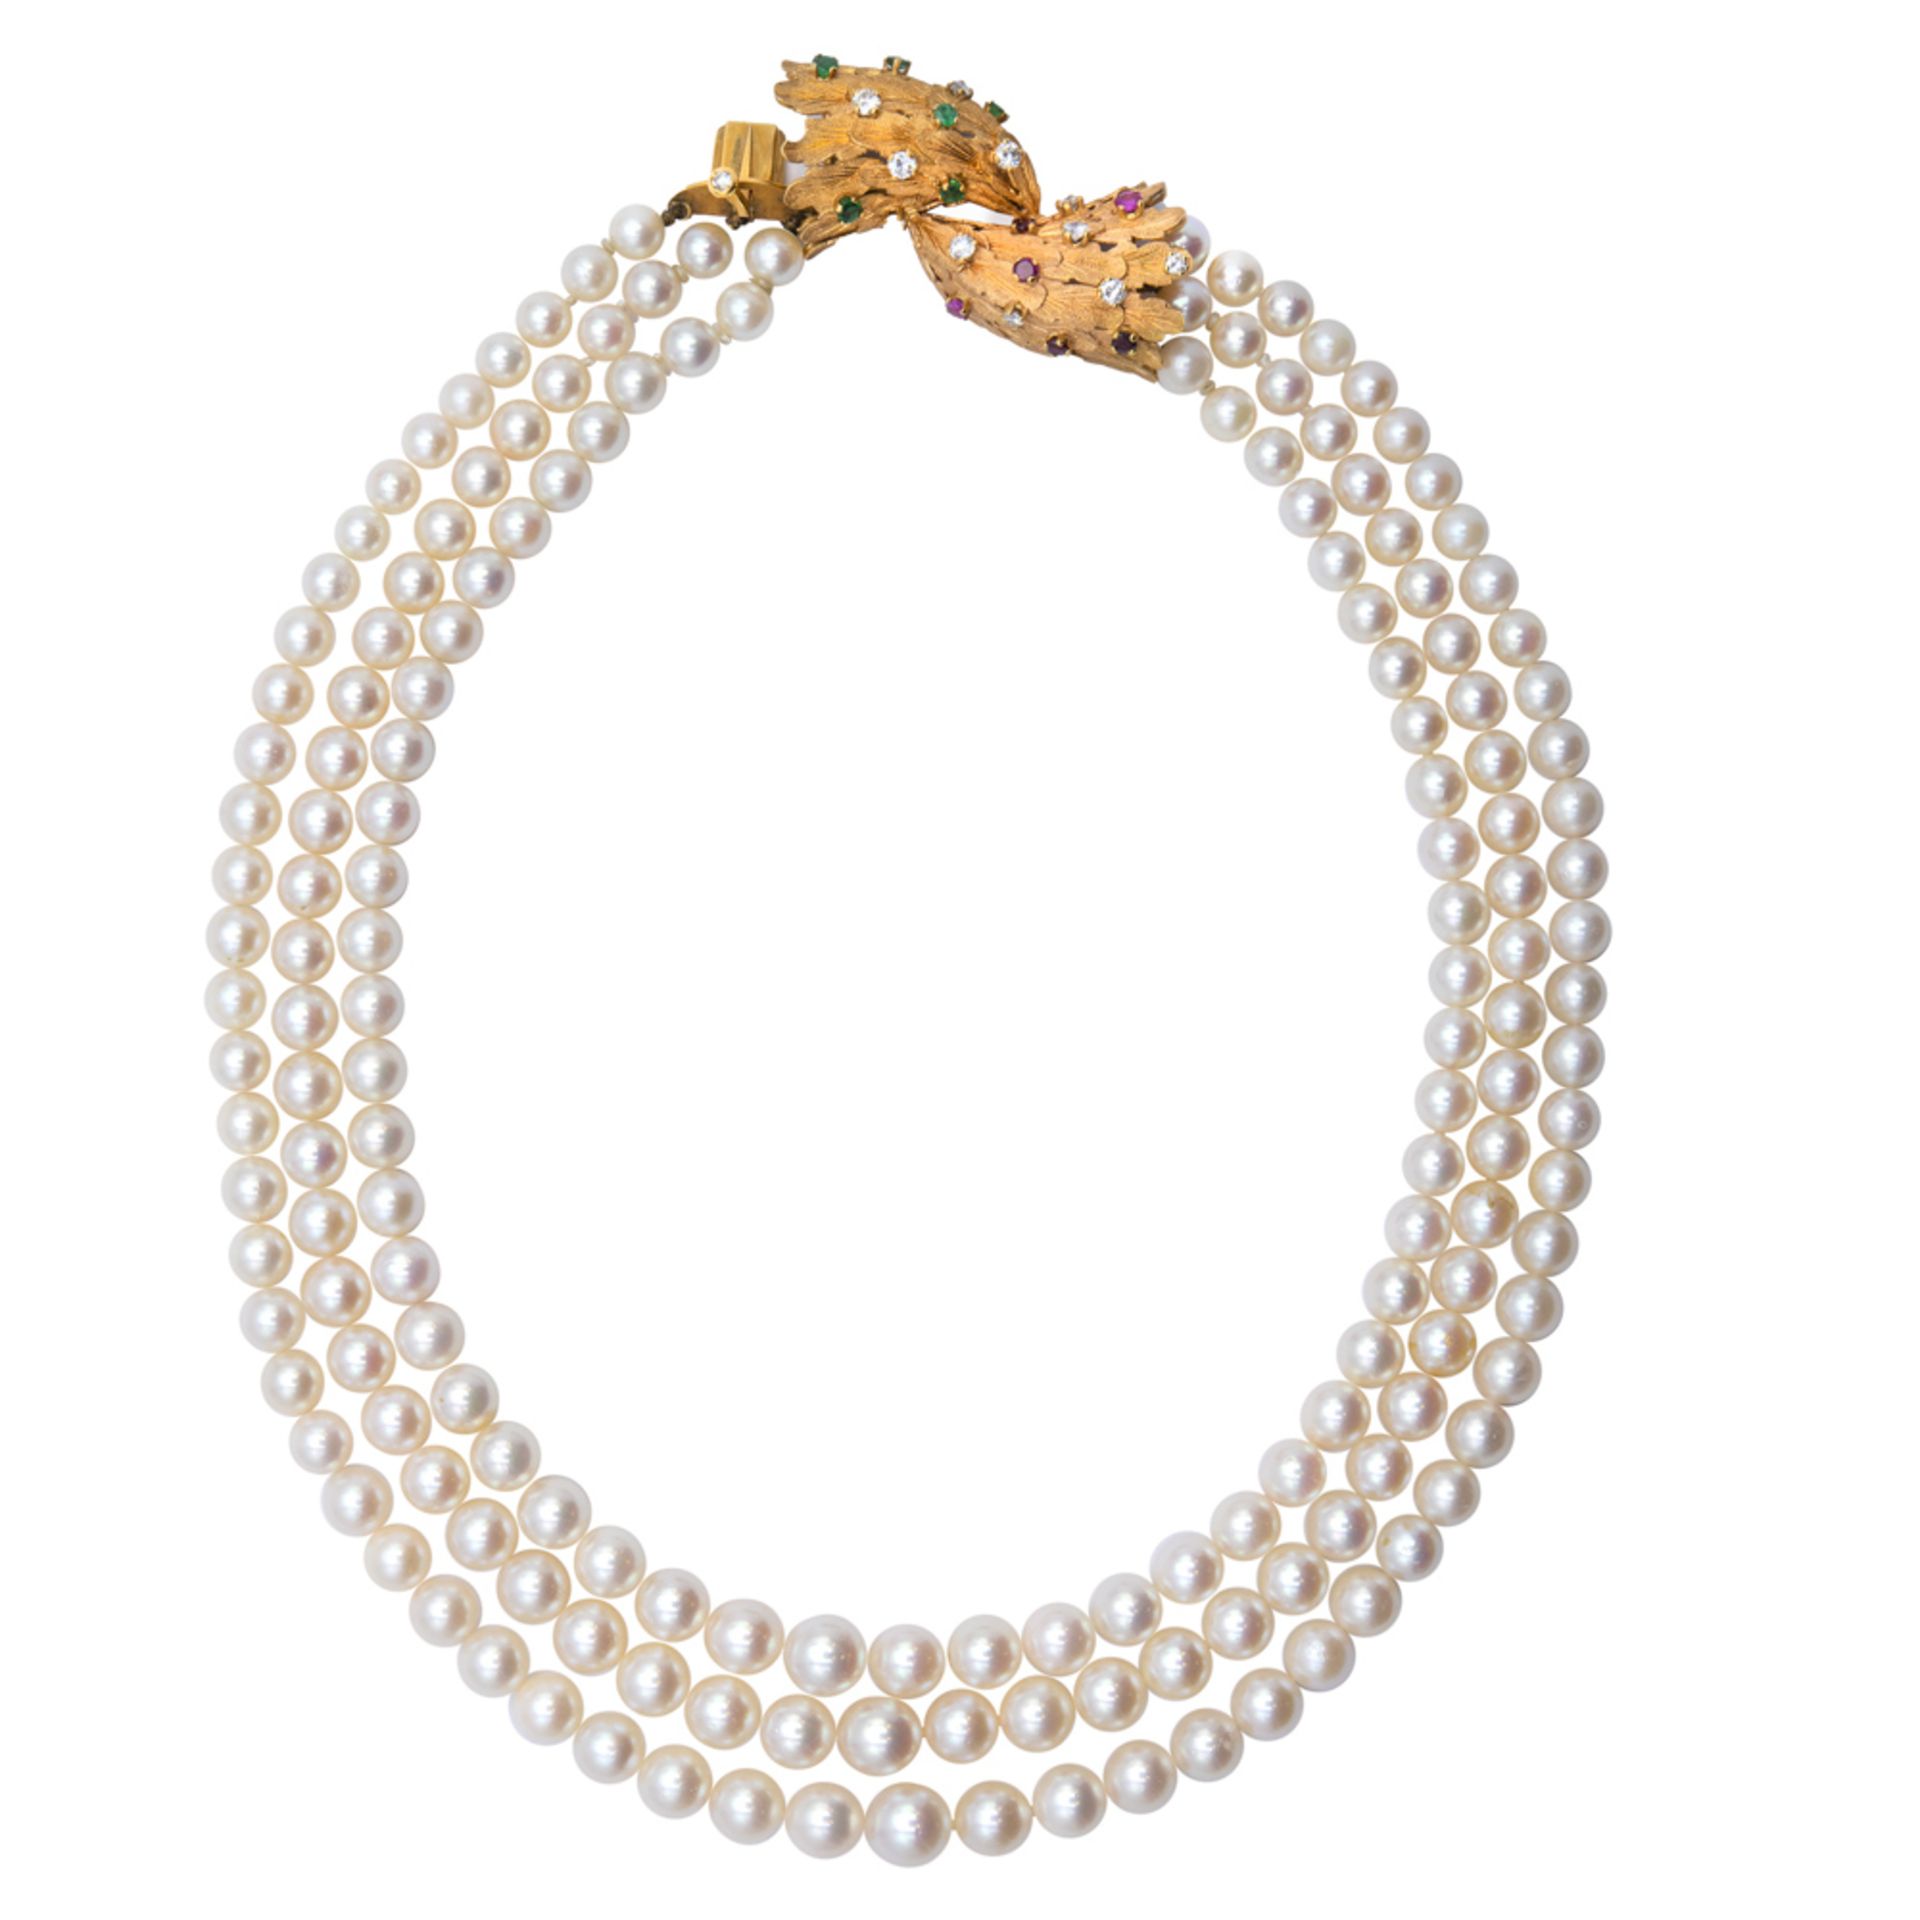 Three strand cultured pearl necklace